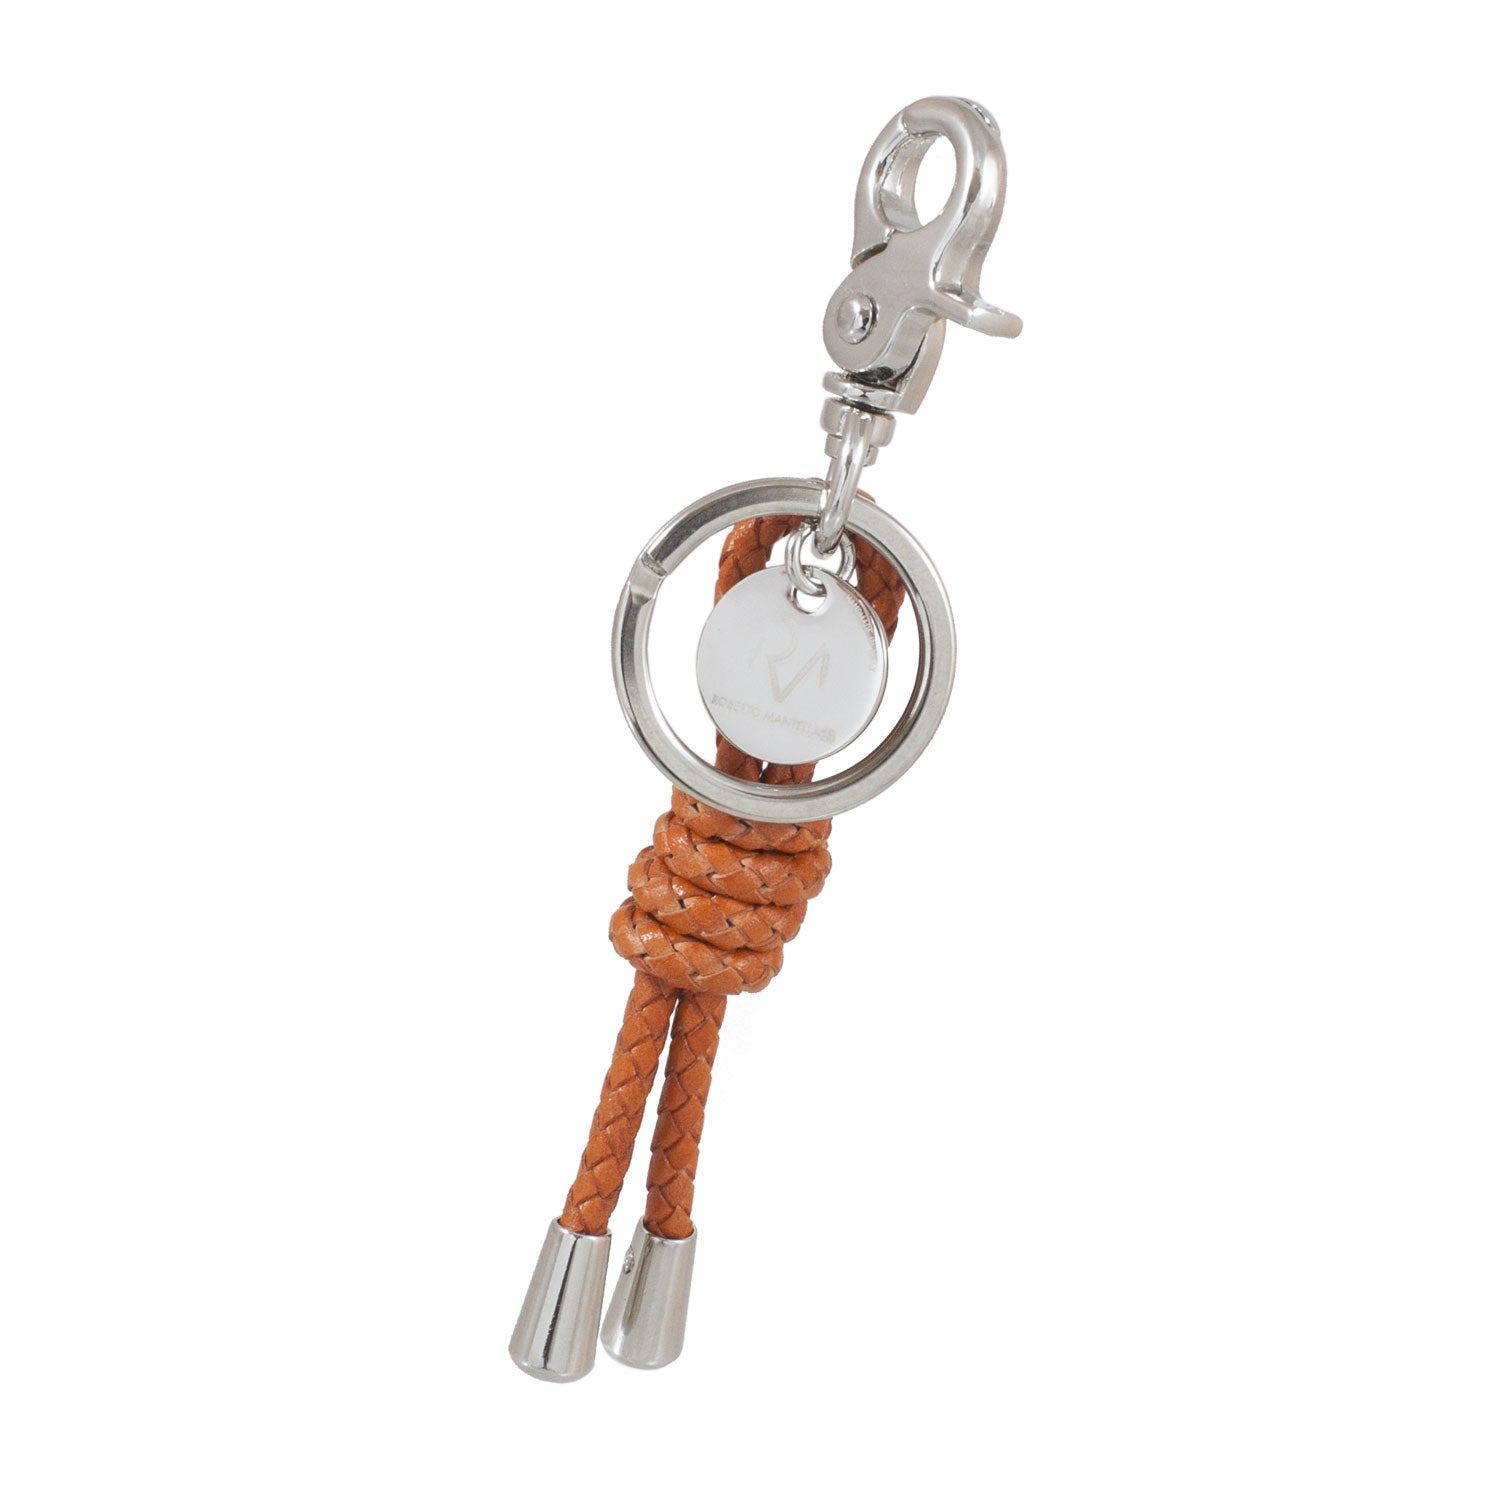 Keychain in Genuine Orange Leather with Scoubidou Knot for Men